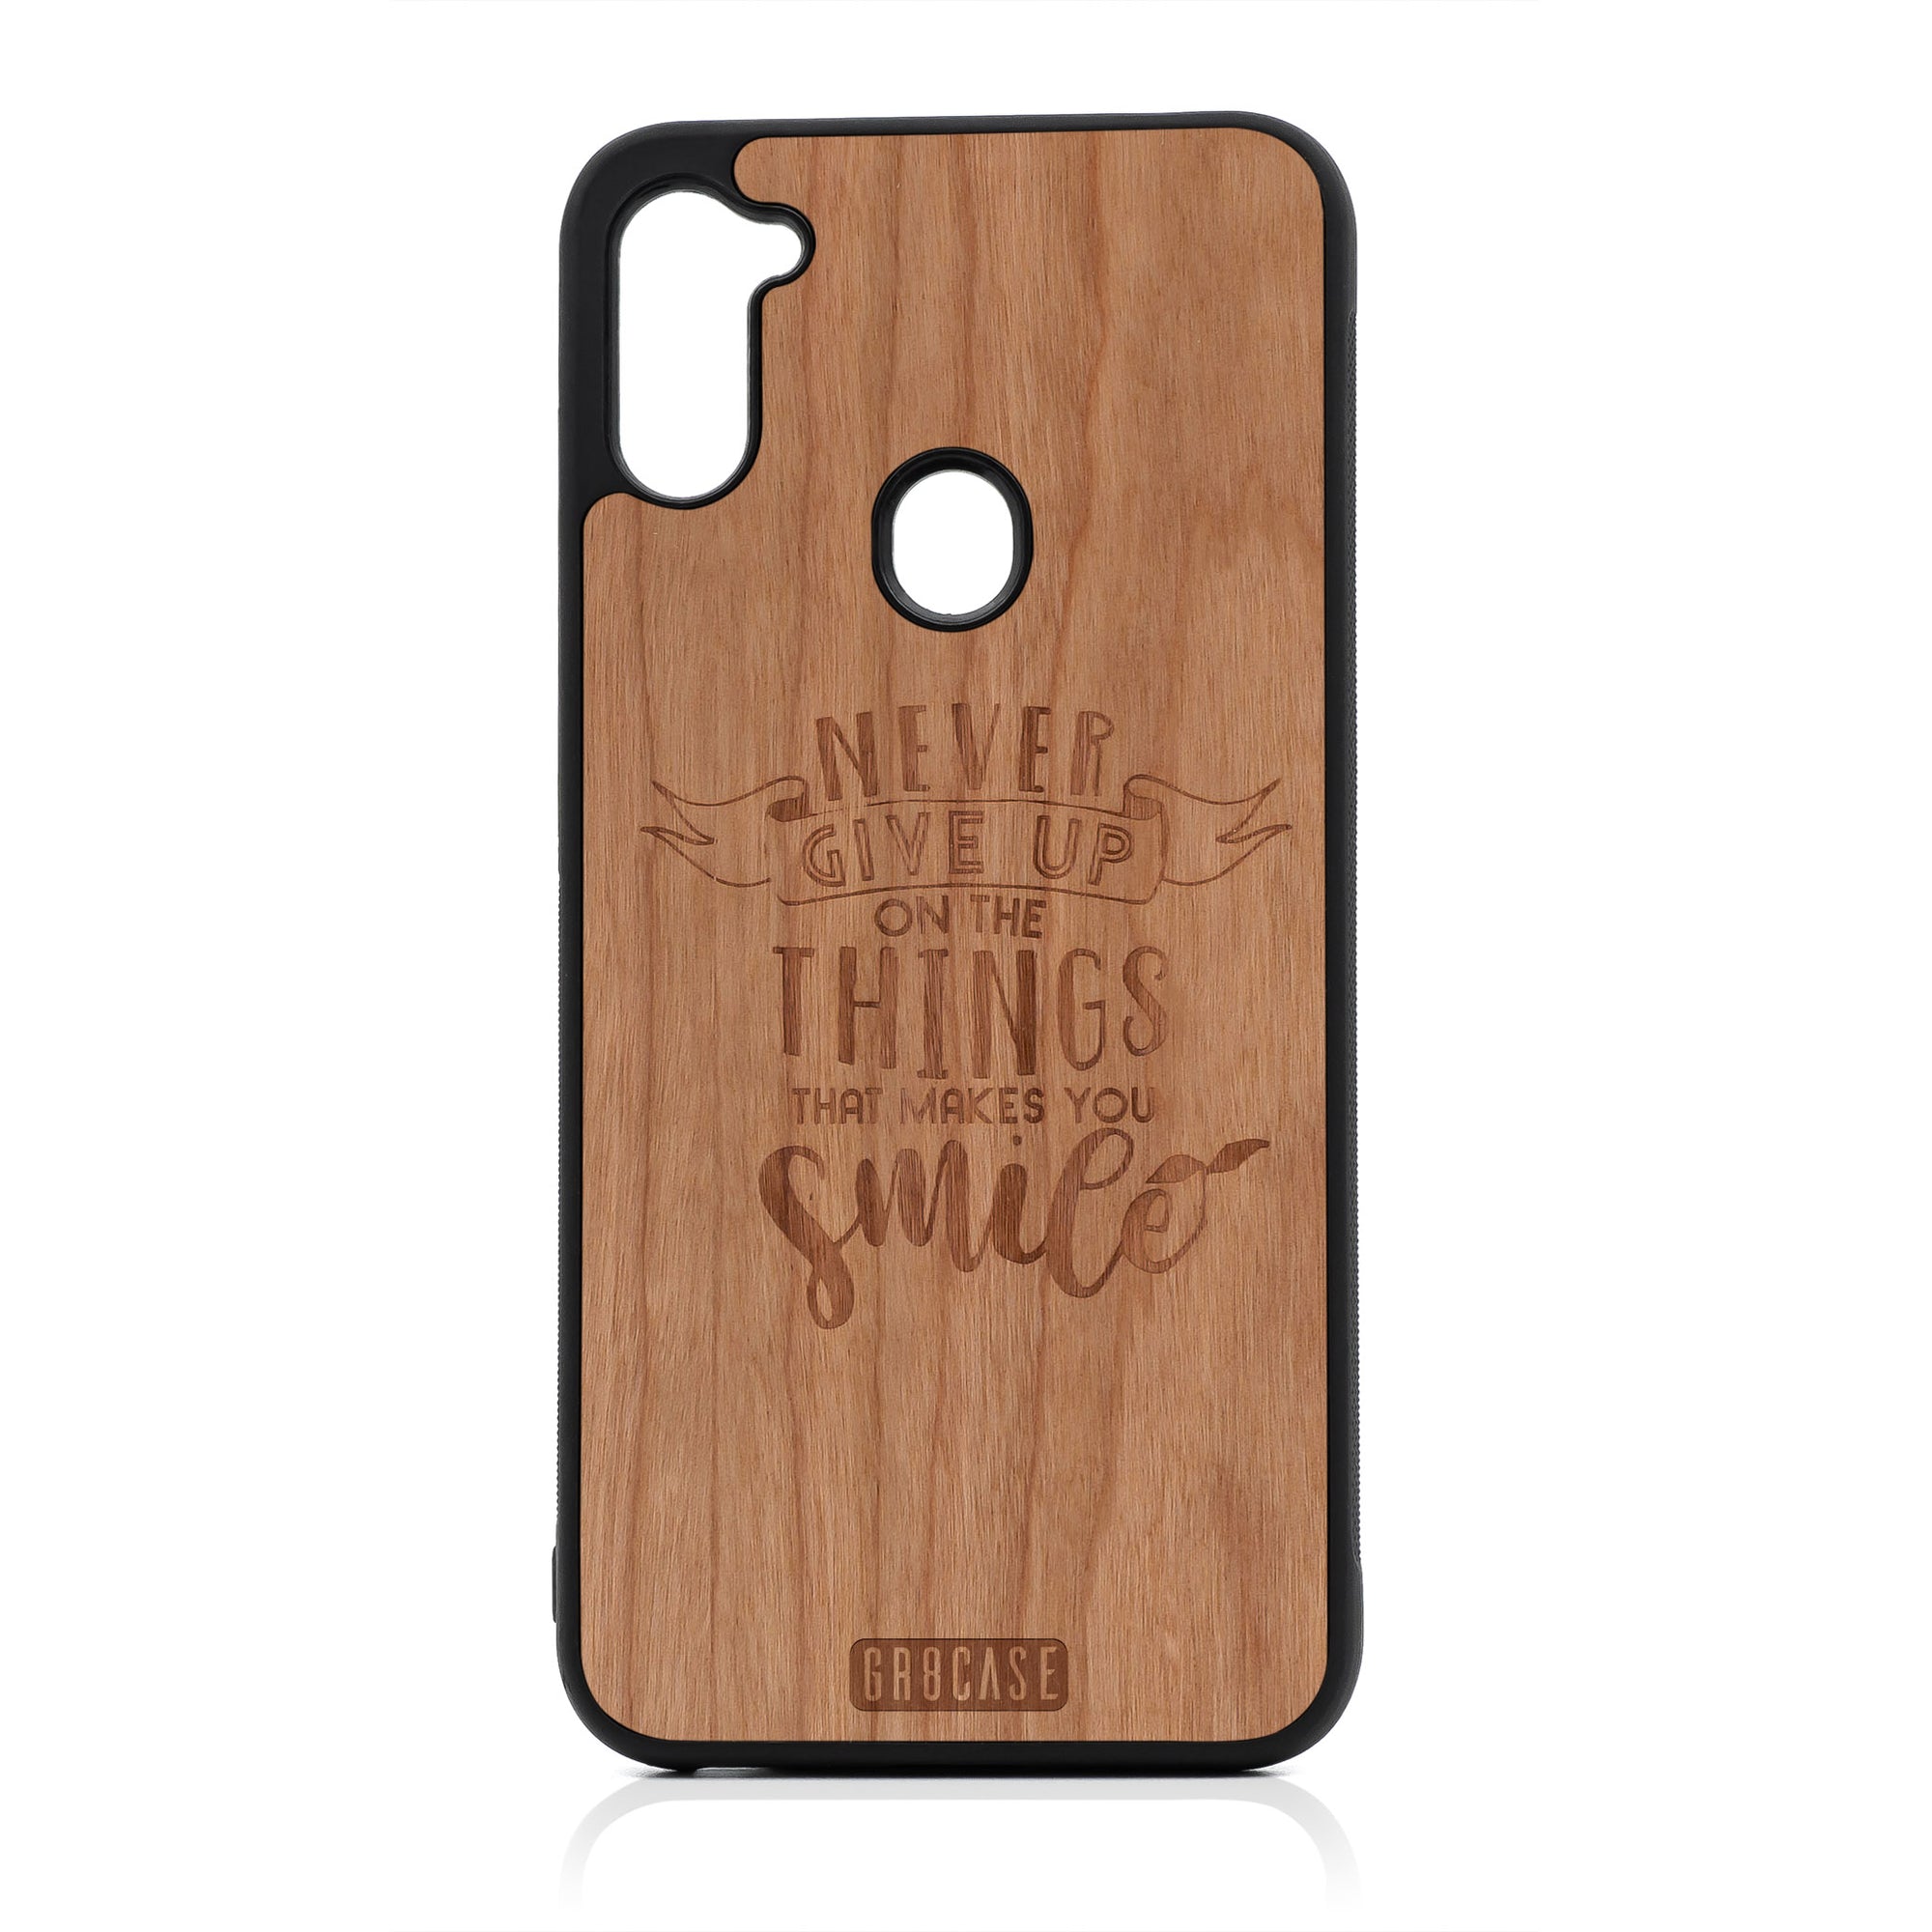 Never Give Up On The Things That Makes You Smile Design Wood Case For Samsung Galaxy A11